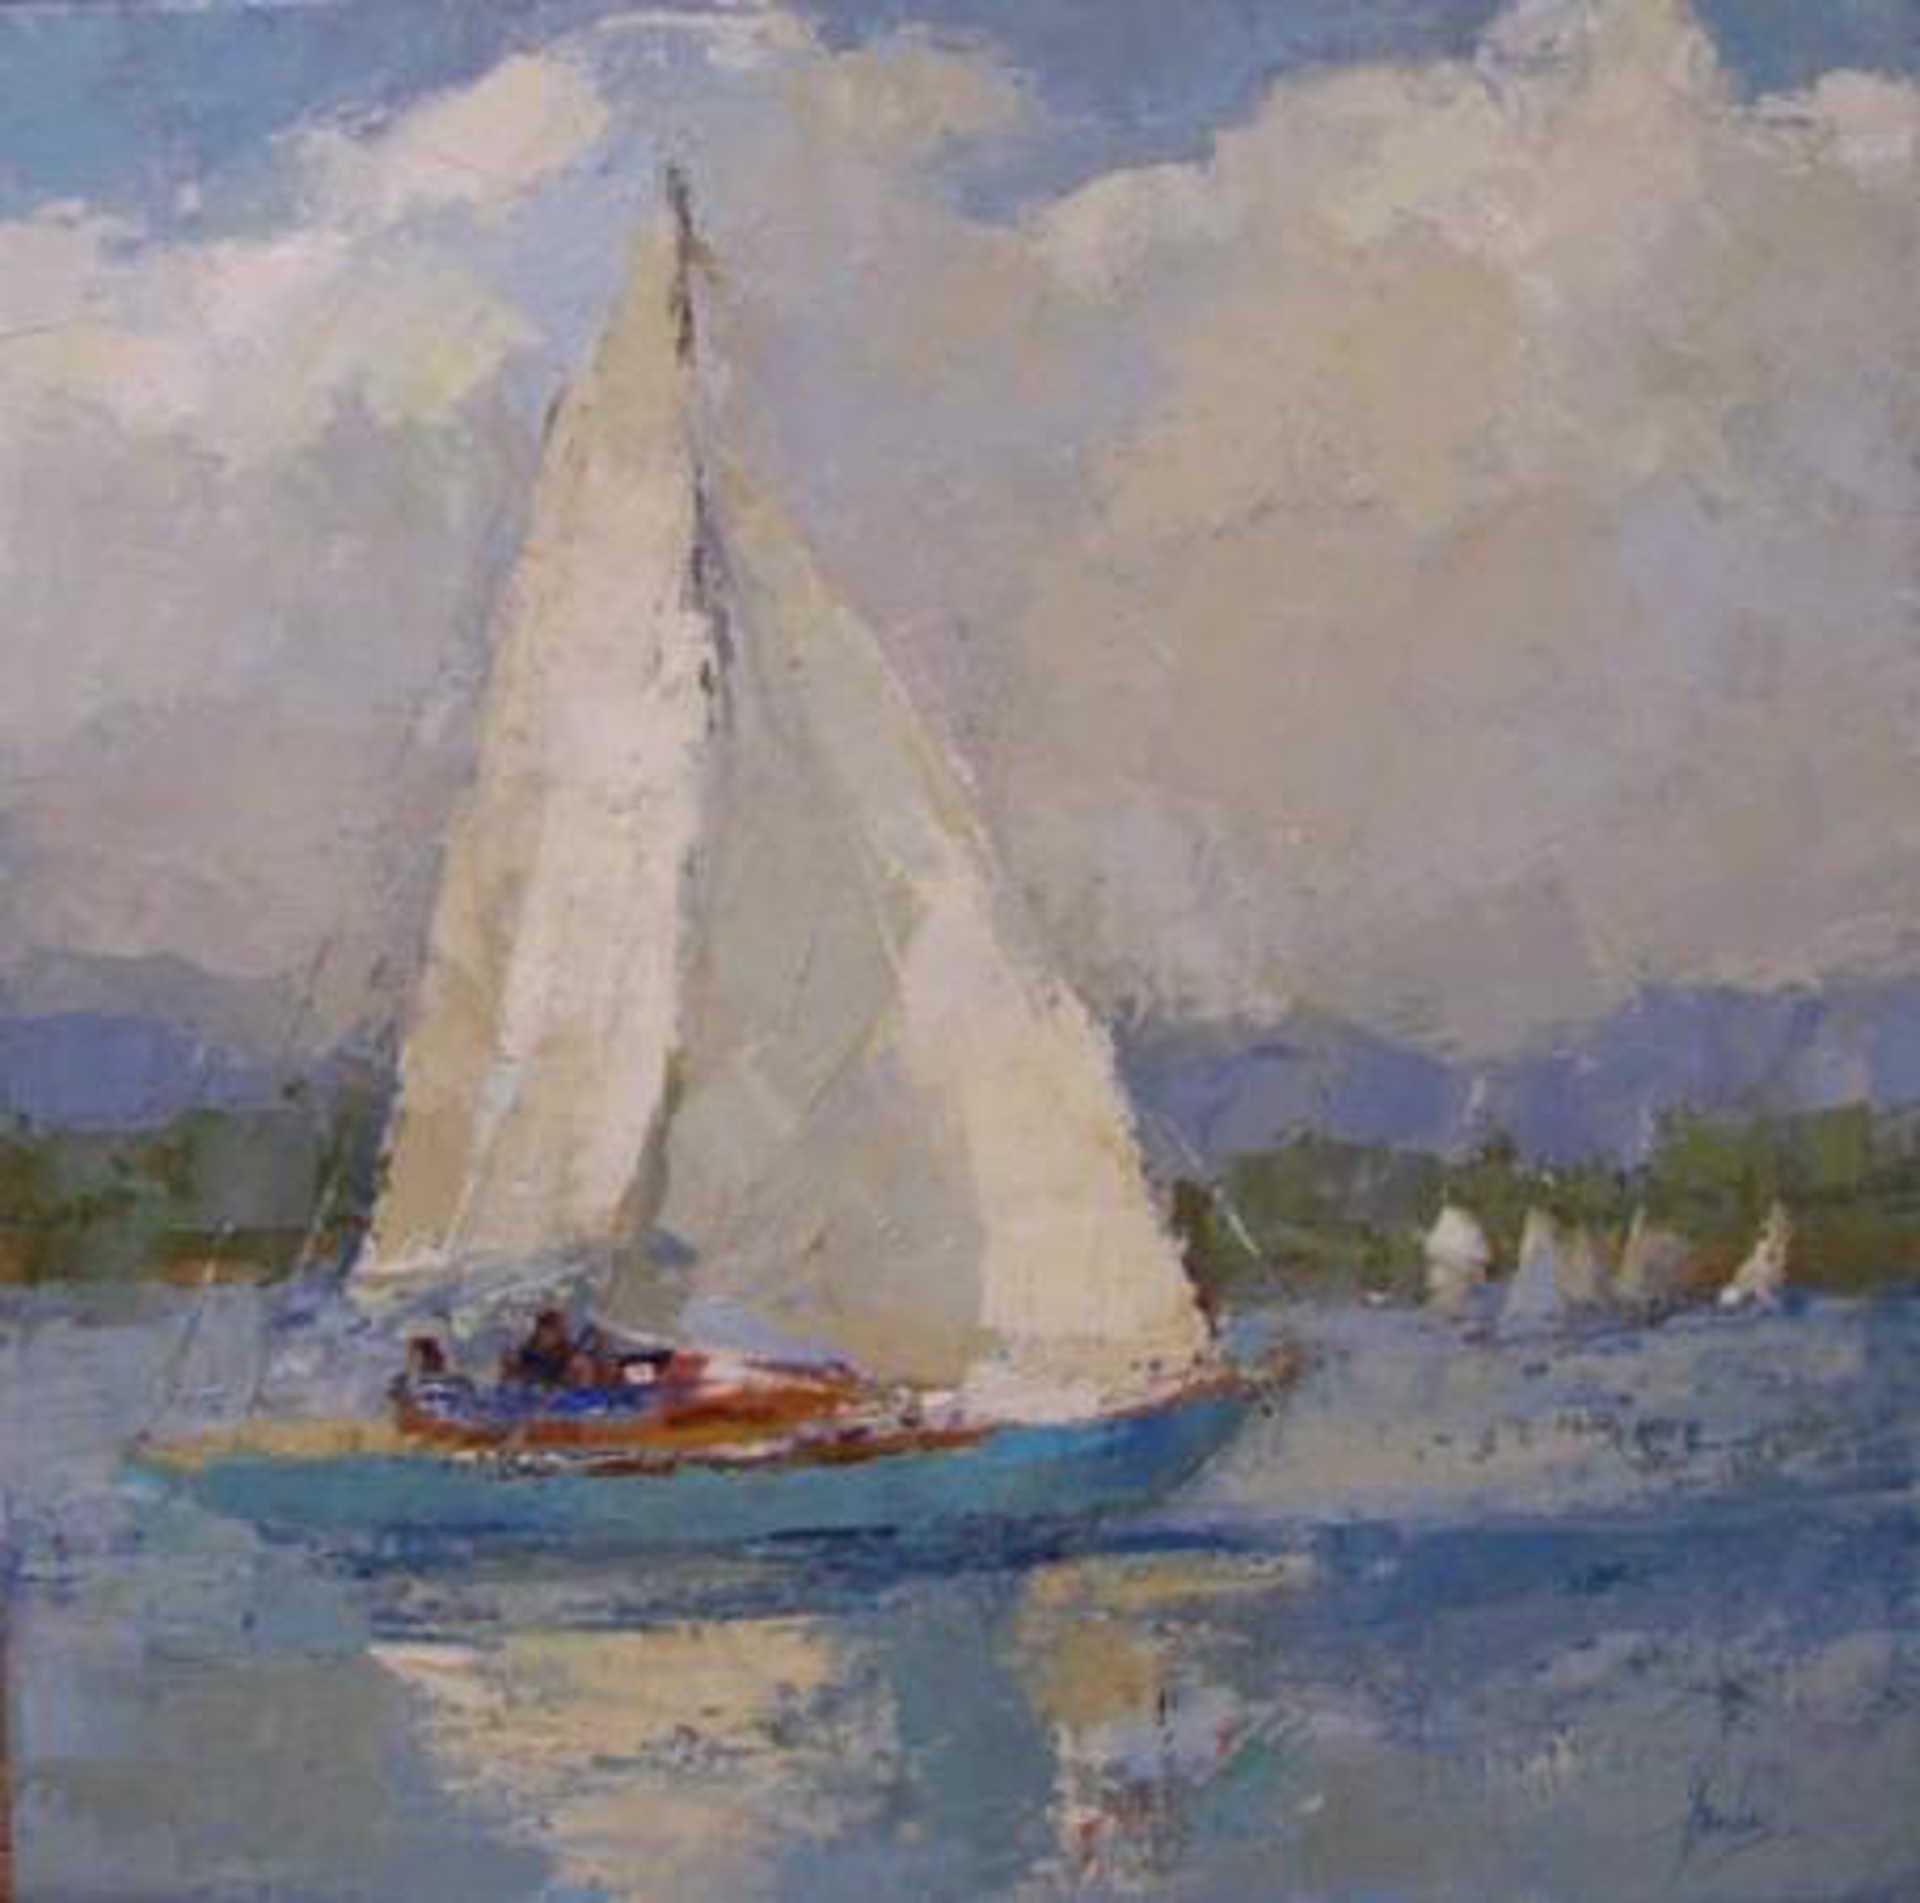 Sailboats Lake Constance by Barbara Flowers